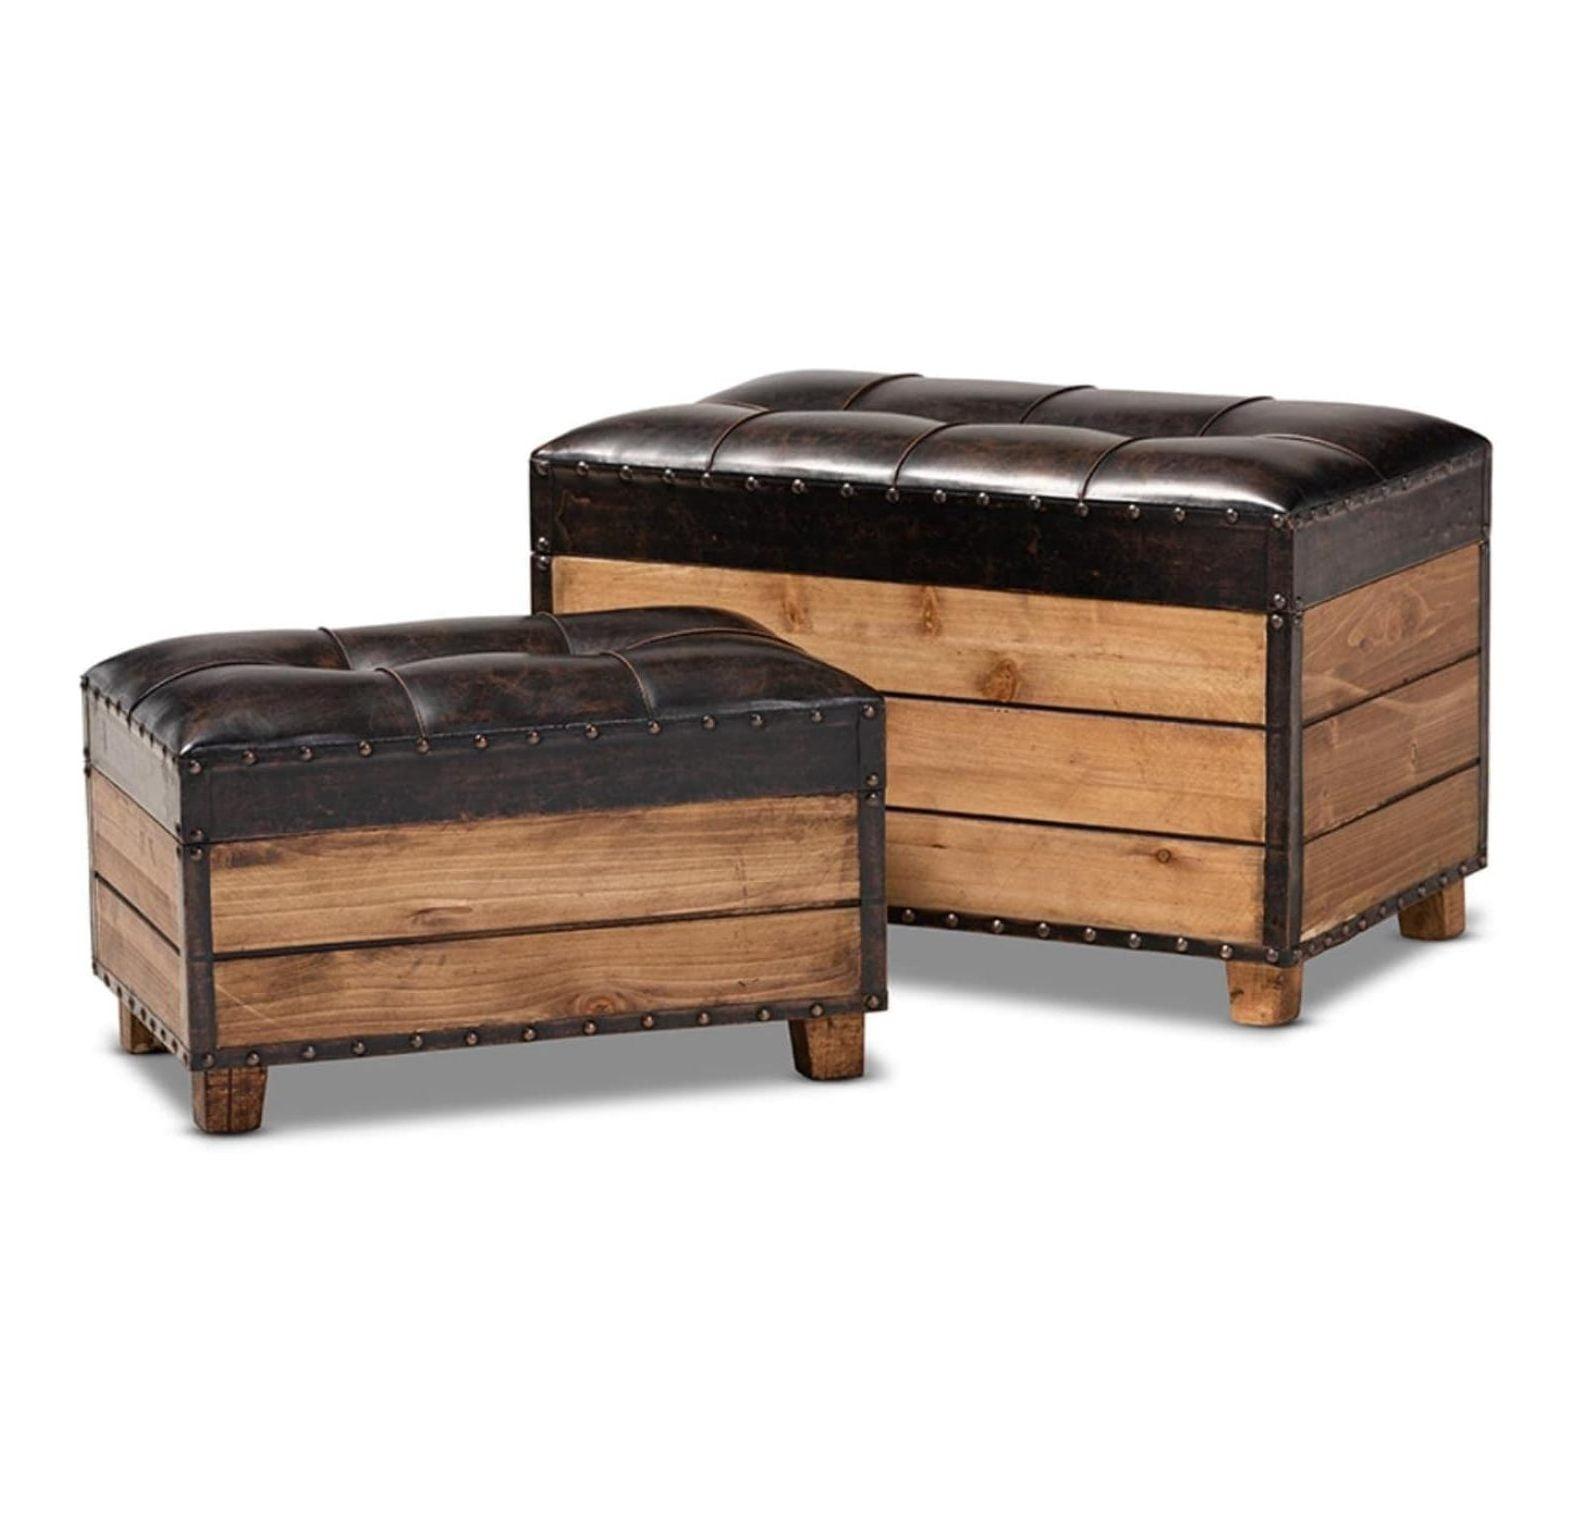 Rustic Dark Brown Faux Leather Tufted Trunk Ottoman Set